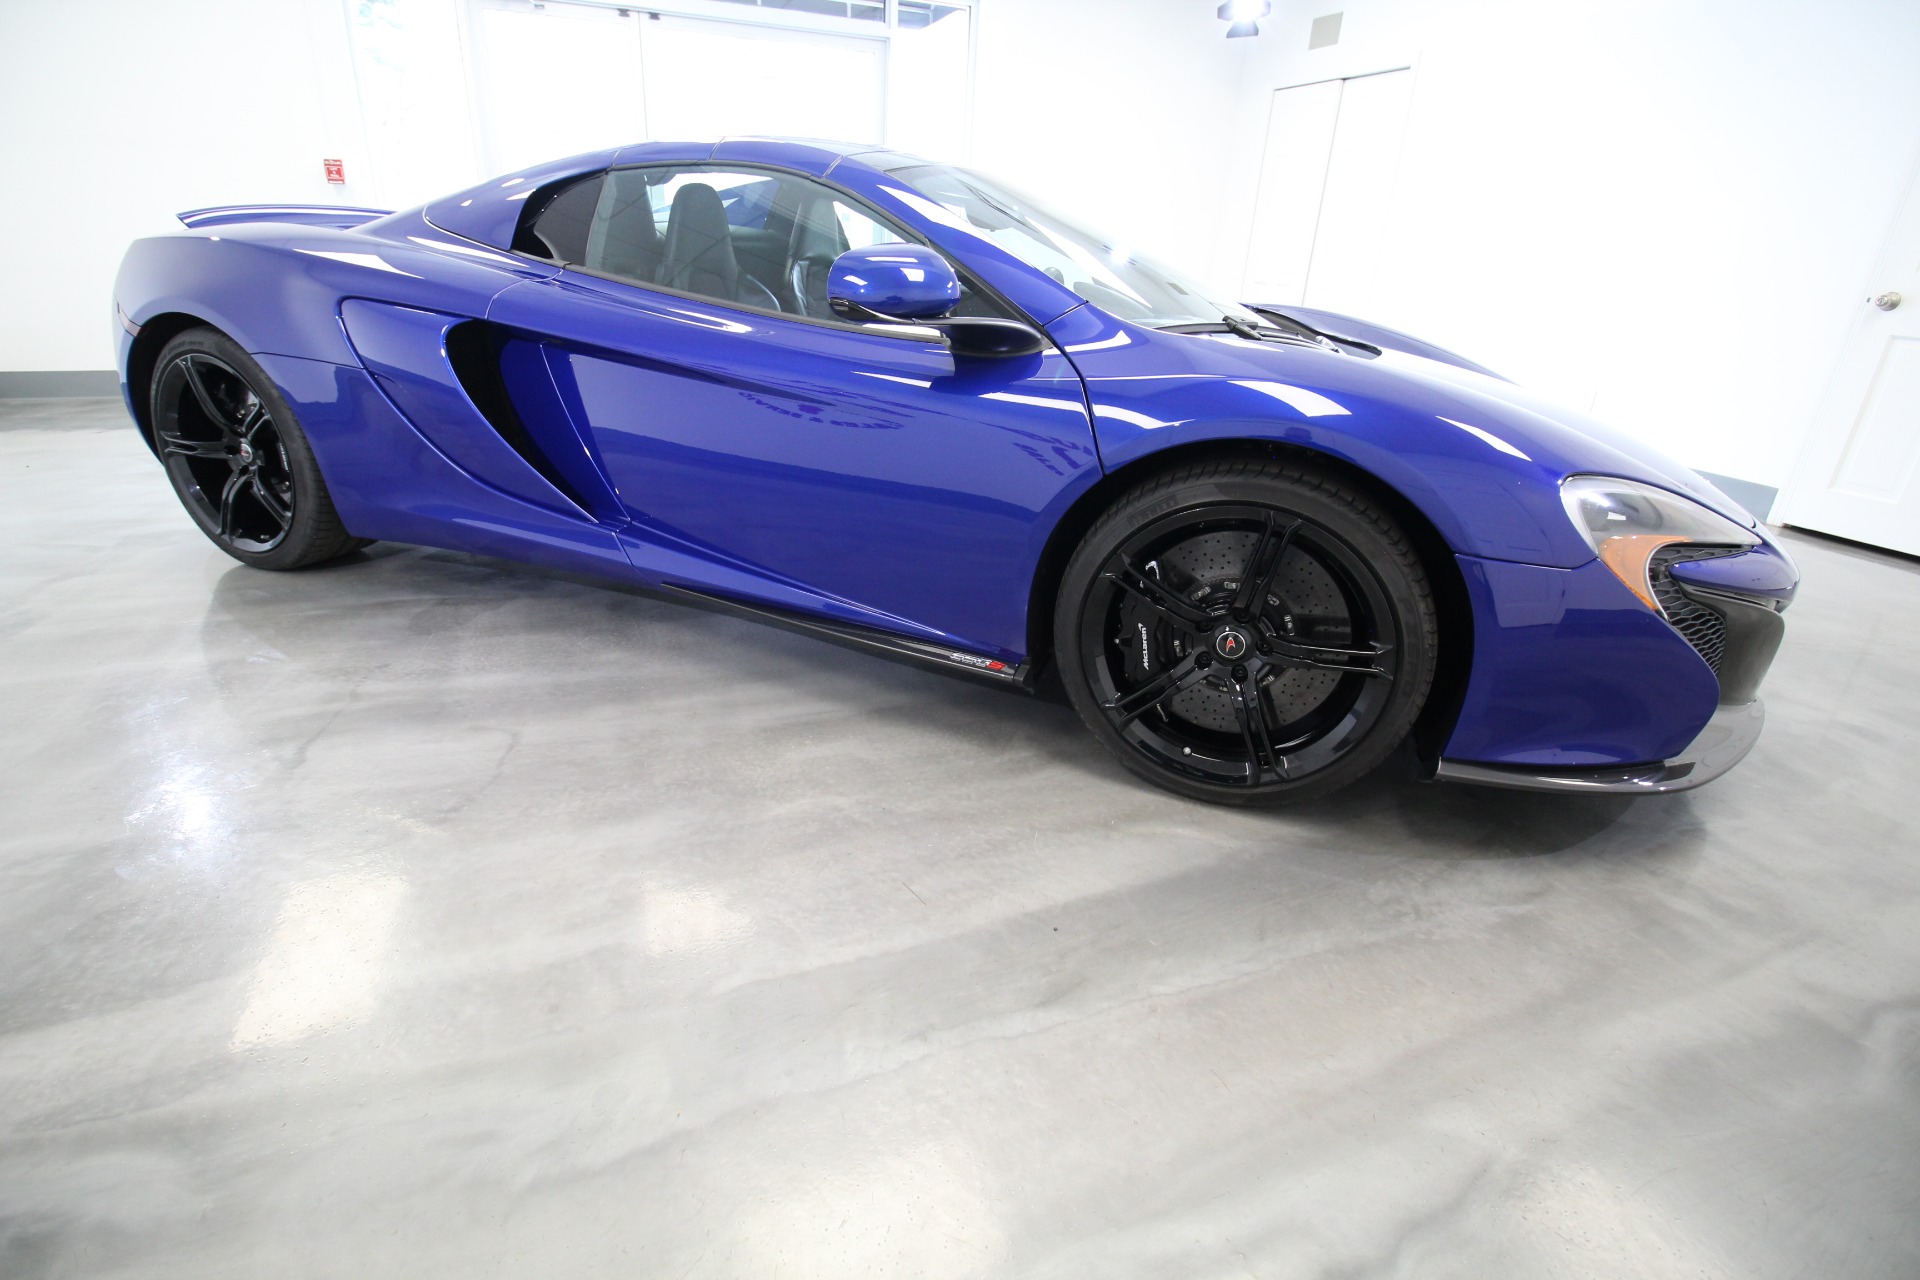 Used 2015 Aurora Blue McLaren 650s SPIDER CONVERTIBLE LOCAL CAR TRADE WITH US FOR A 720 SUPERB | Albany, NY